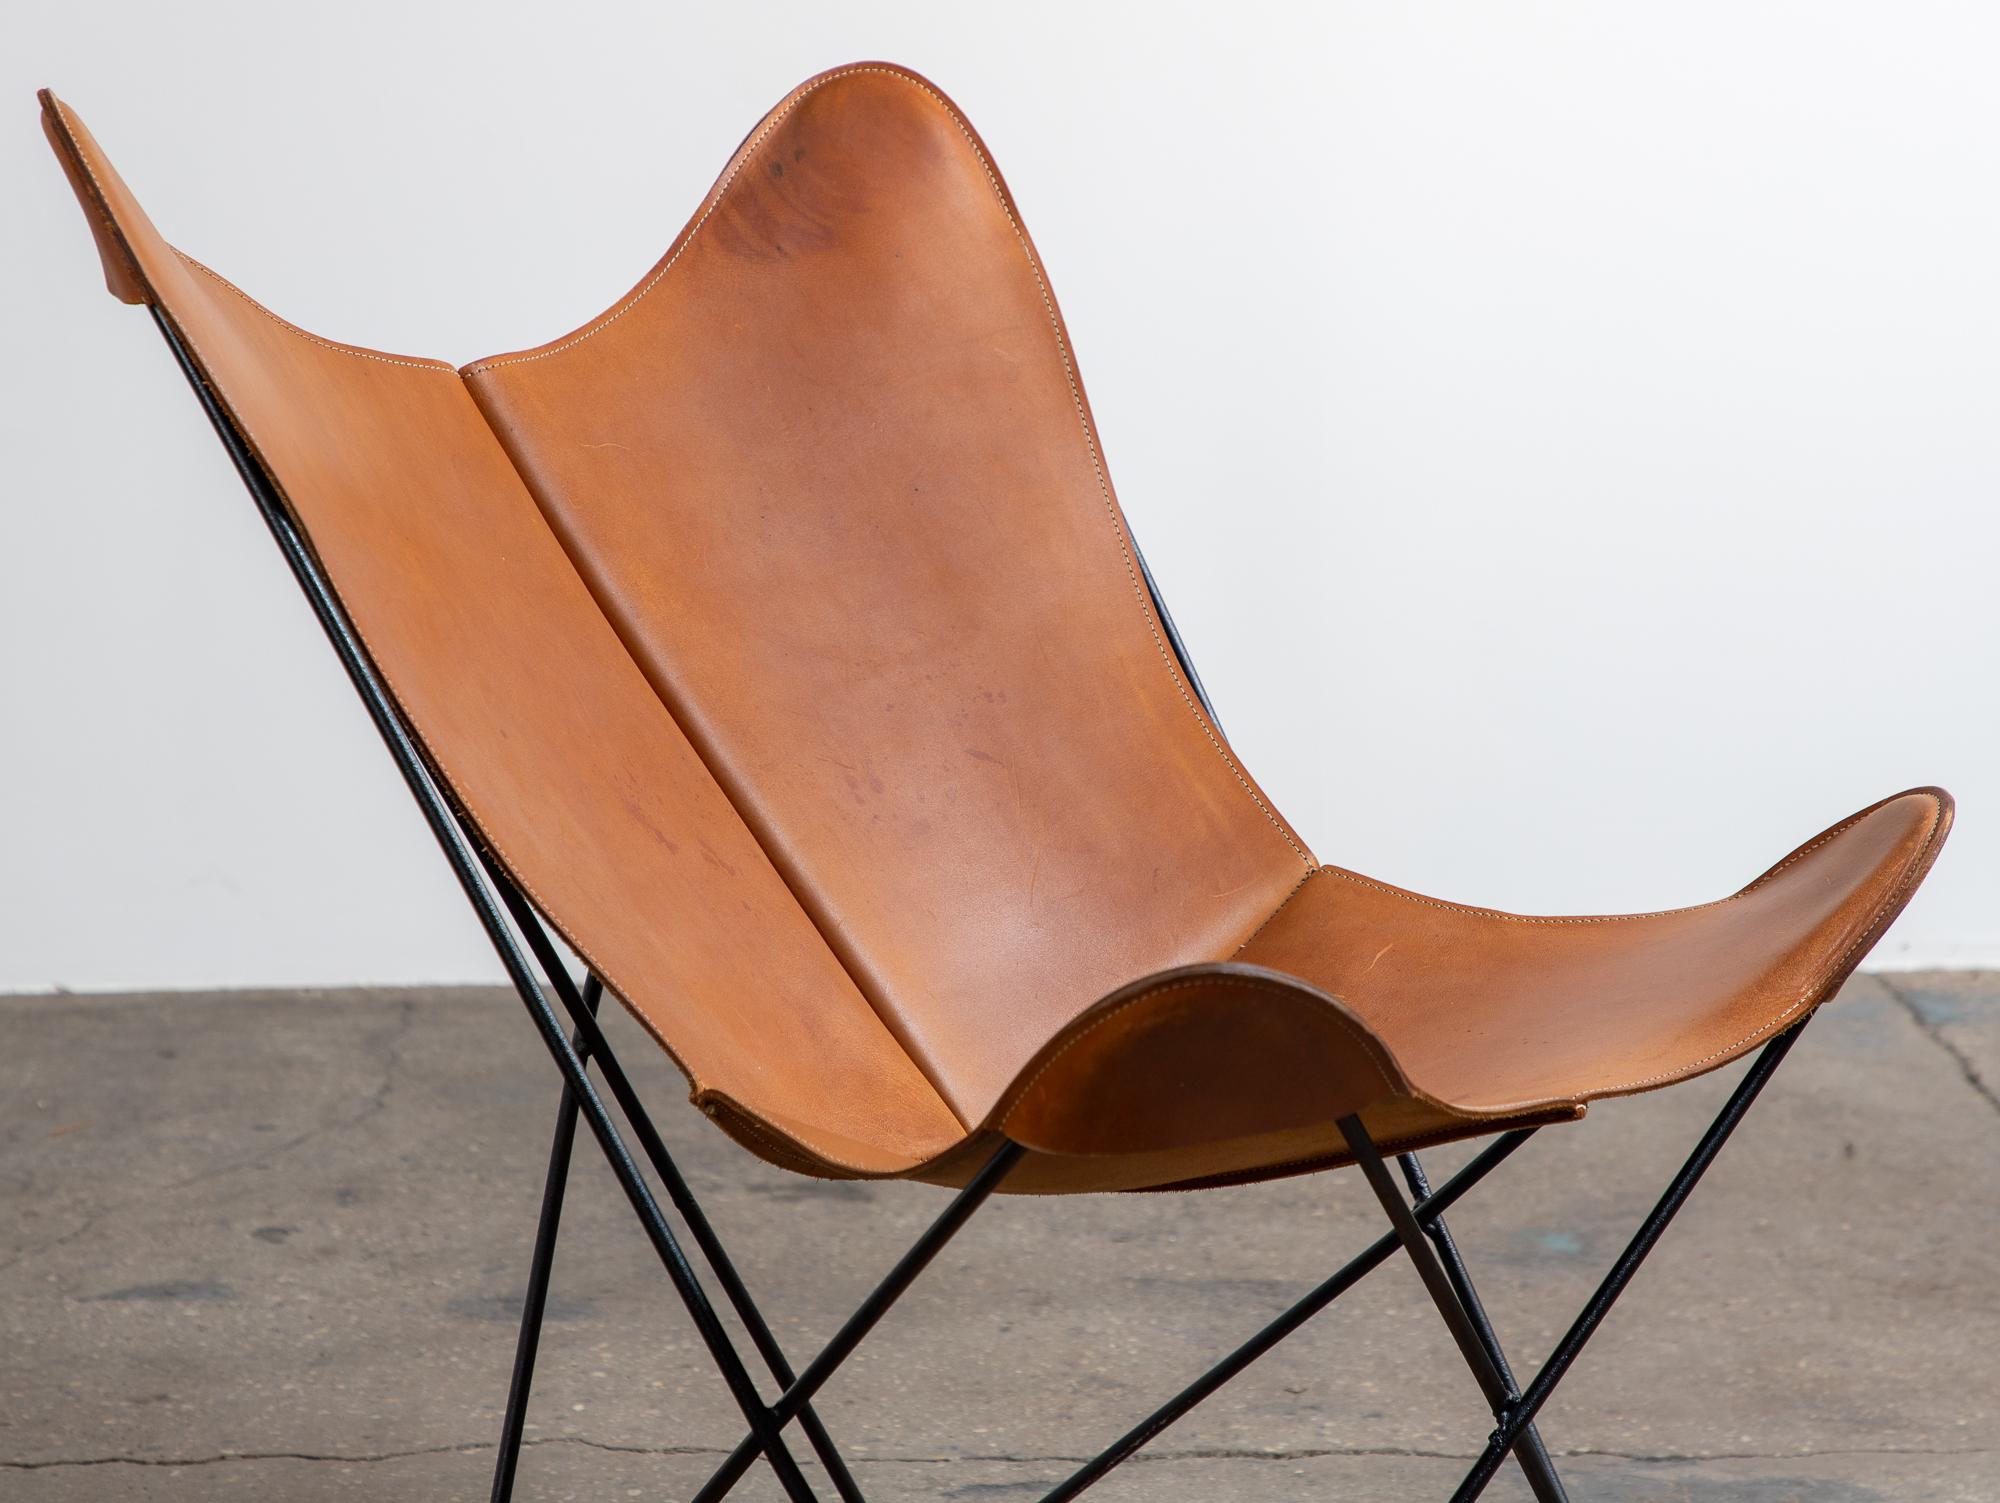 Mid-Century Modern Original Cognac Leather Hardoy Butterfly Chair, Issued by Knoll, 1950s For Sale